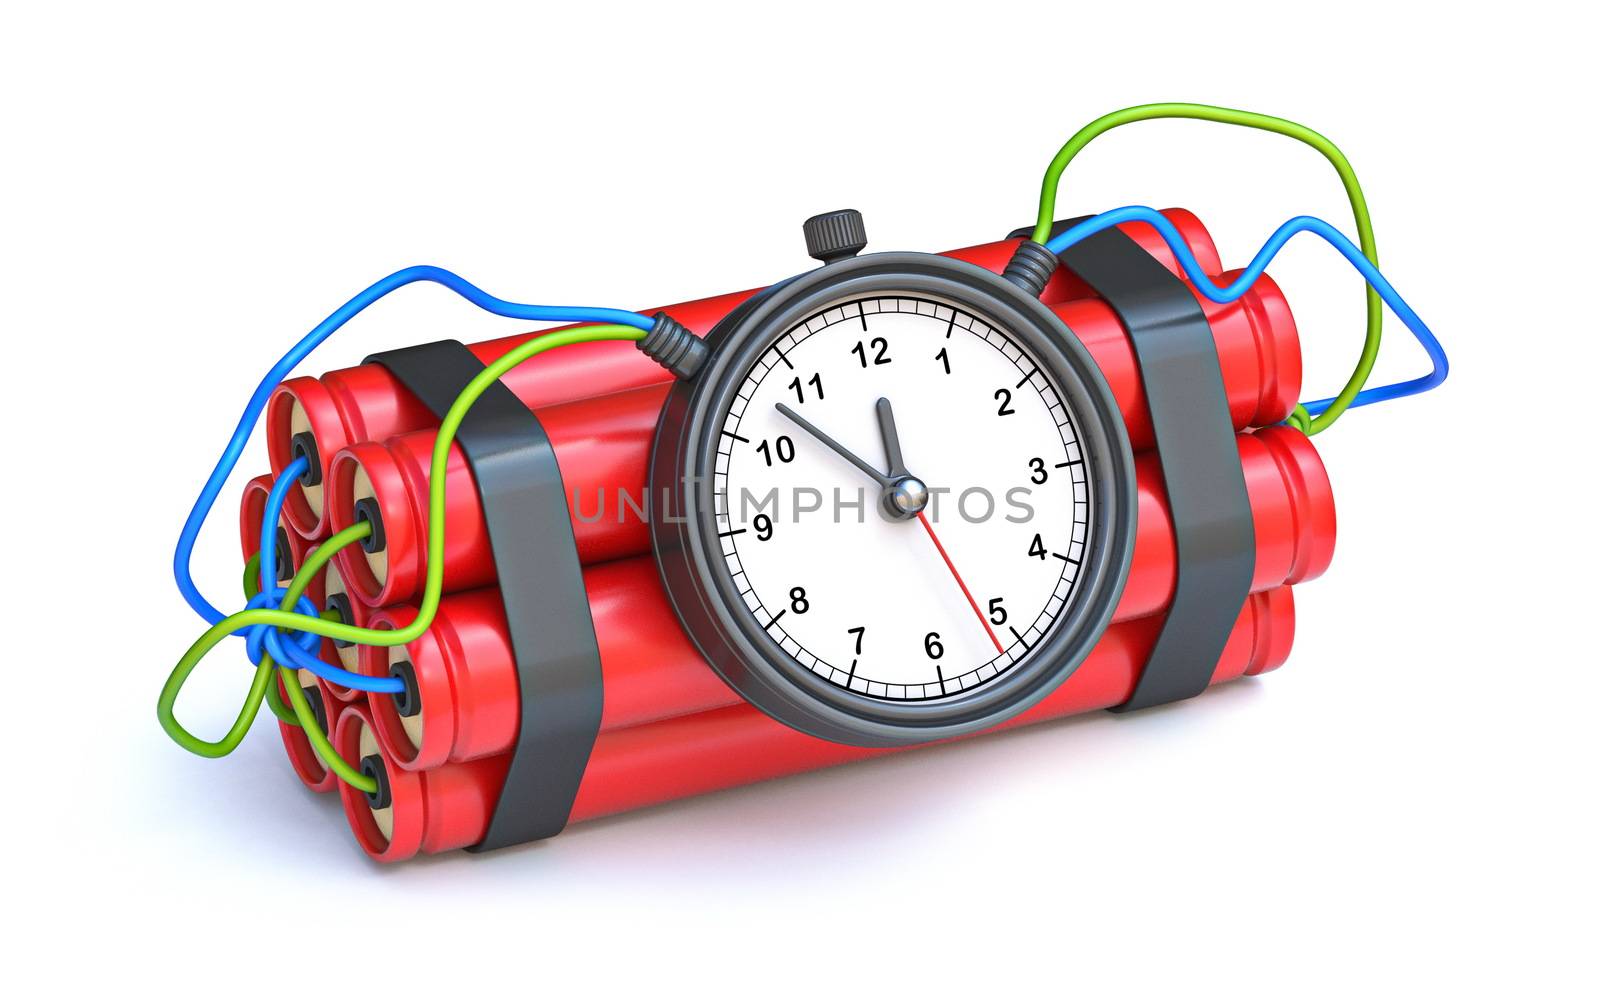 Dynamite with clock timer 3D render illustration isolated on white background